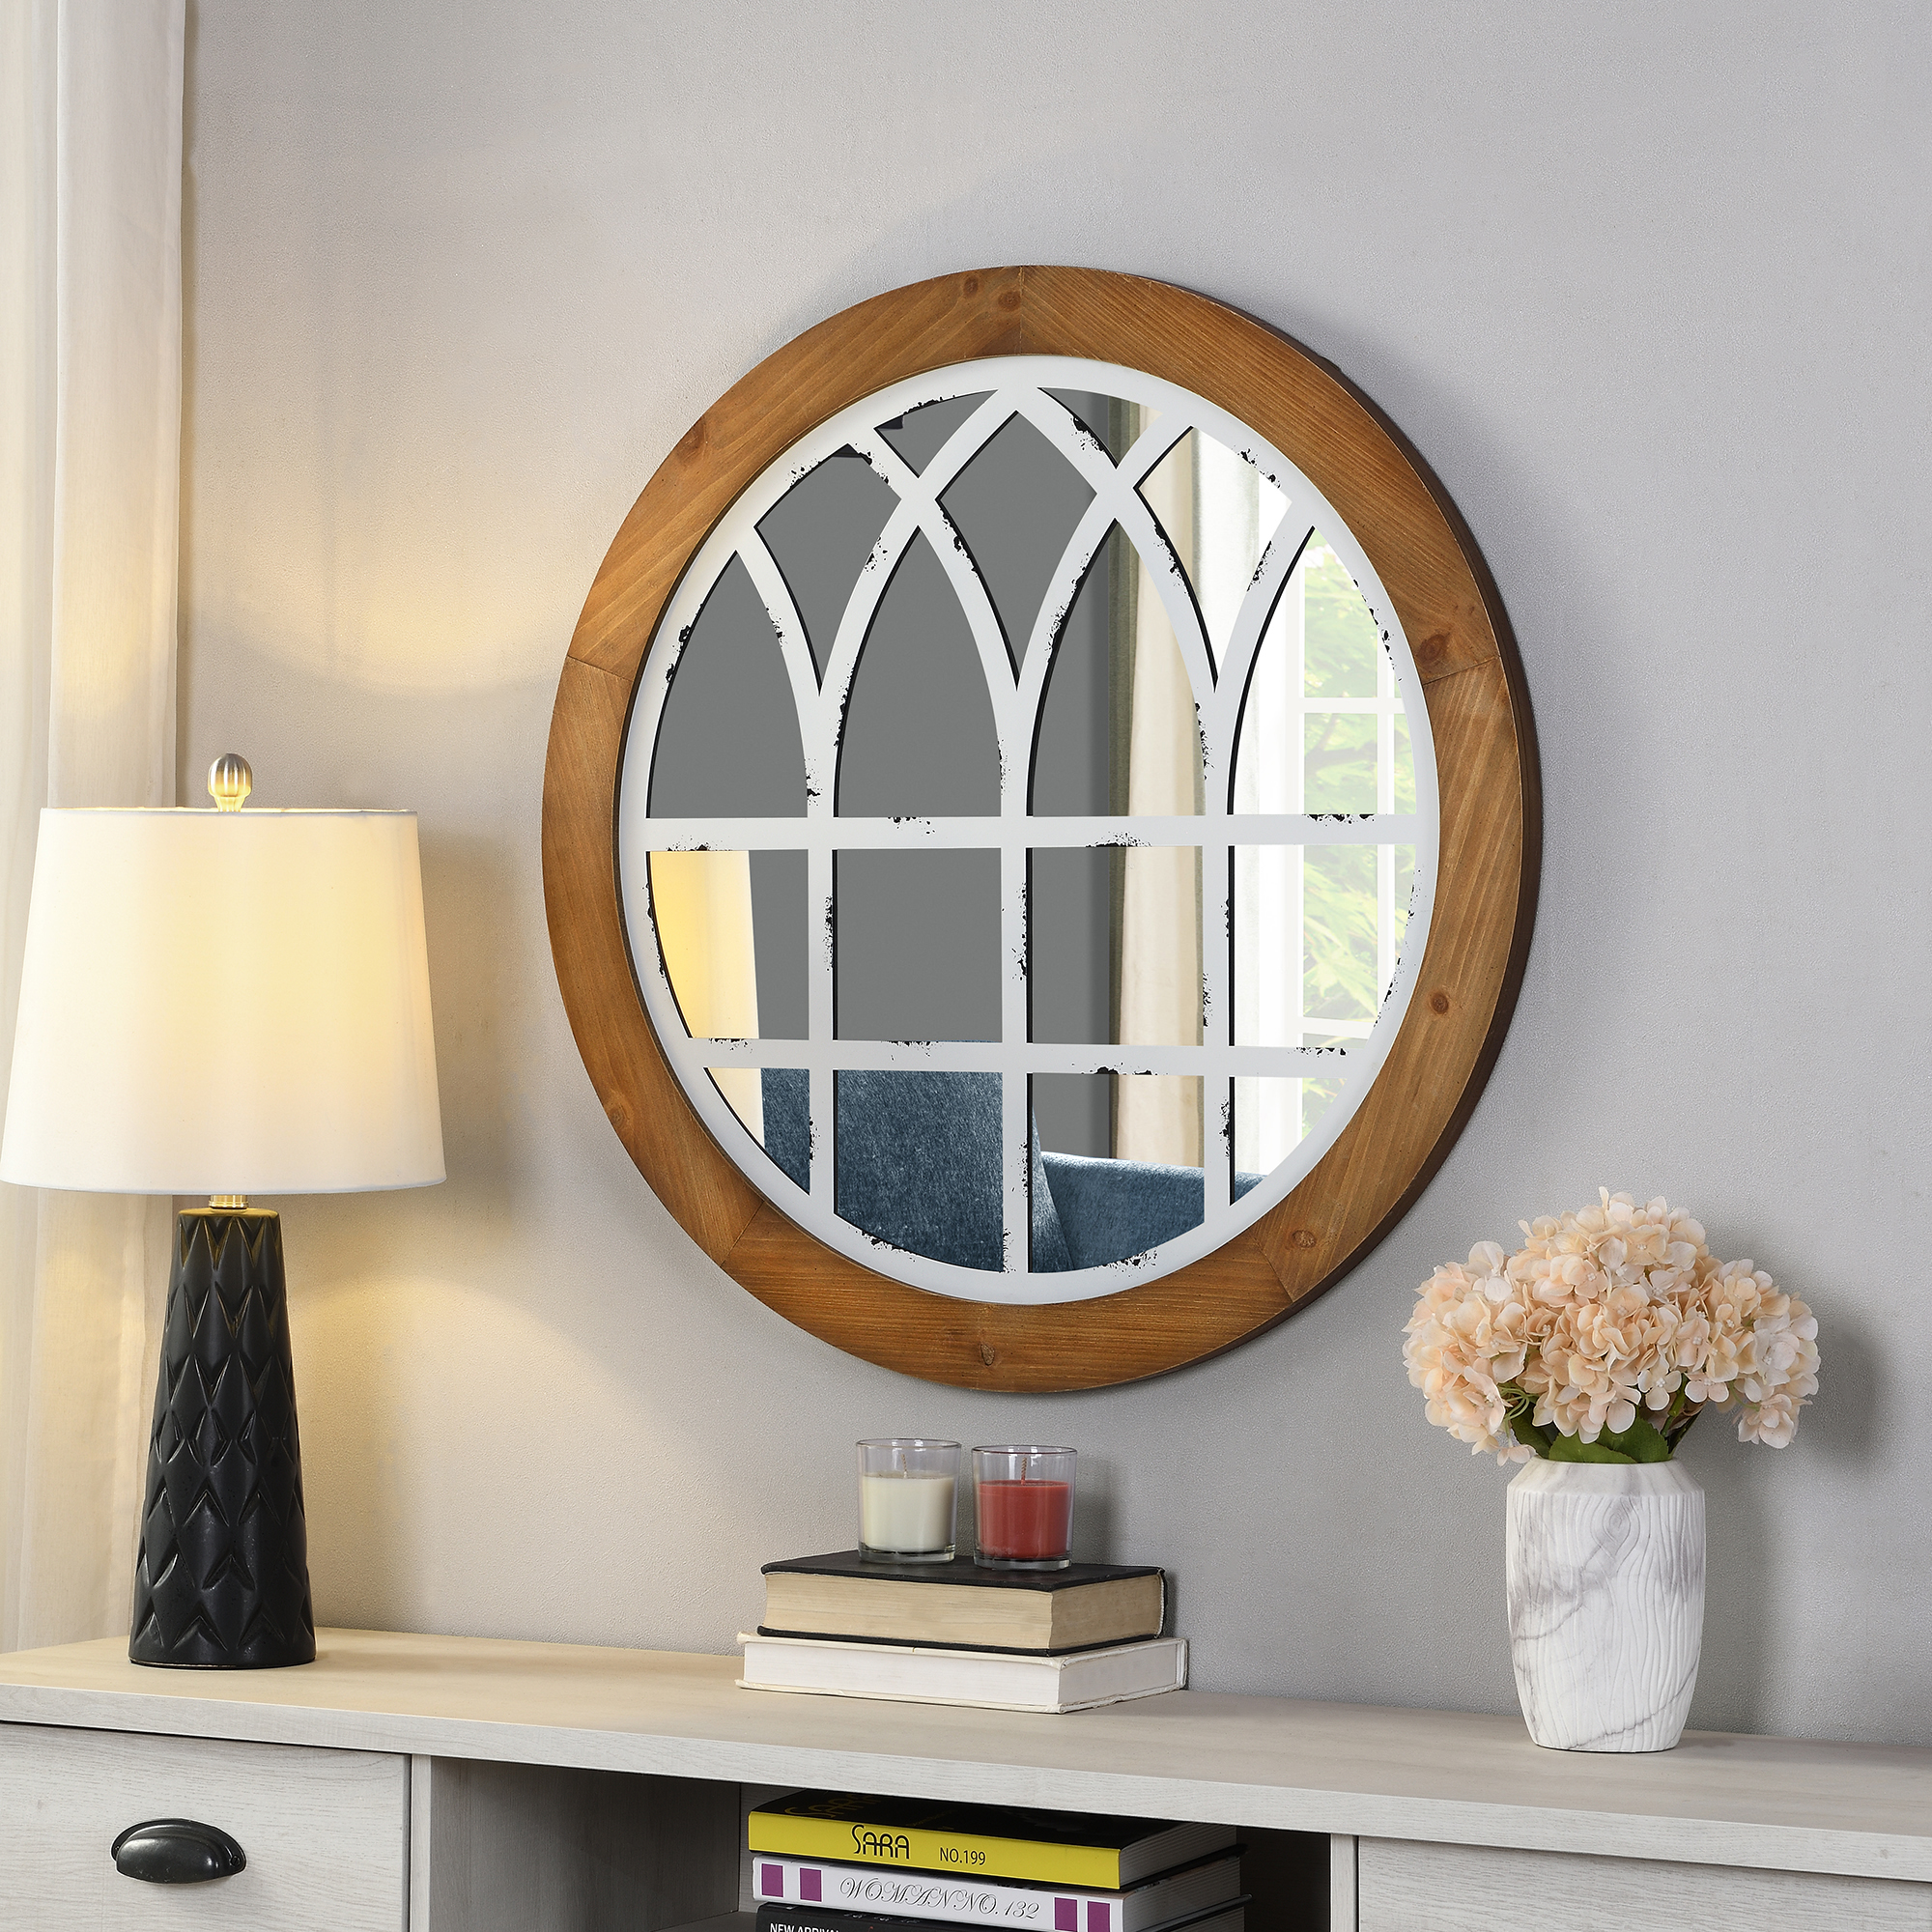 FirsTime & Co.® Covington Farmhouse White Arch Mirror, American Crafted